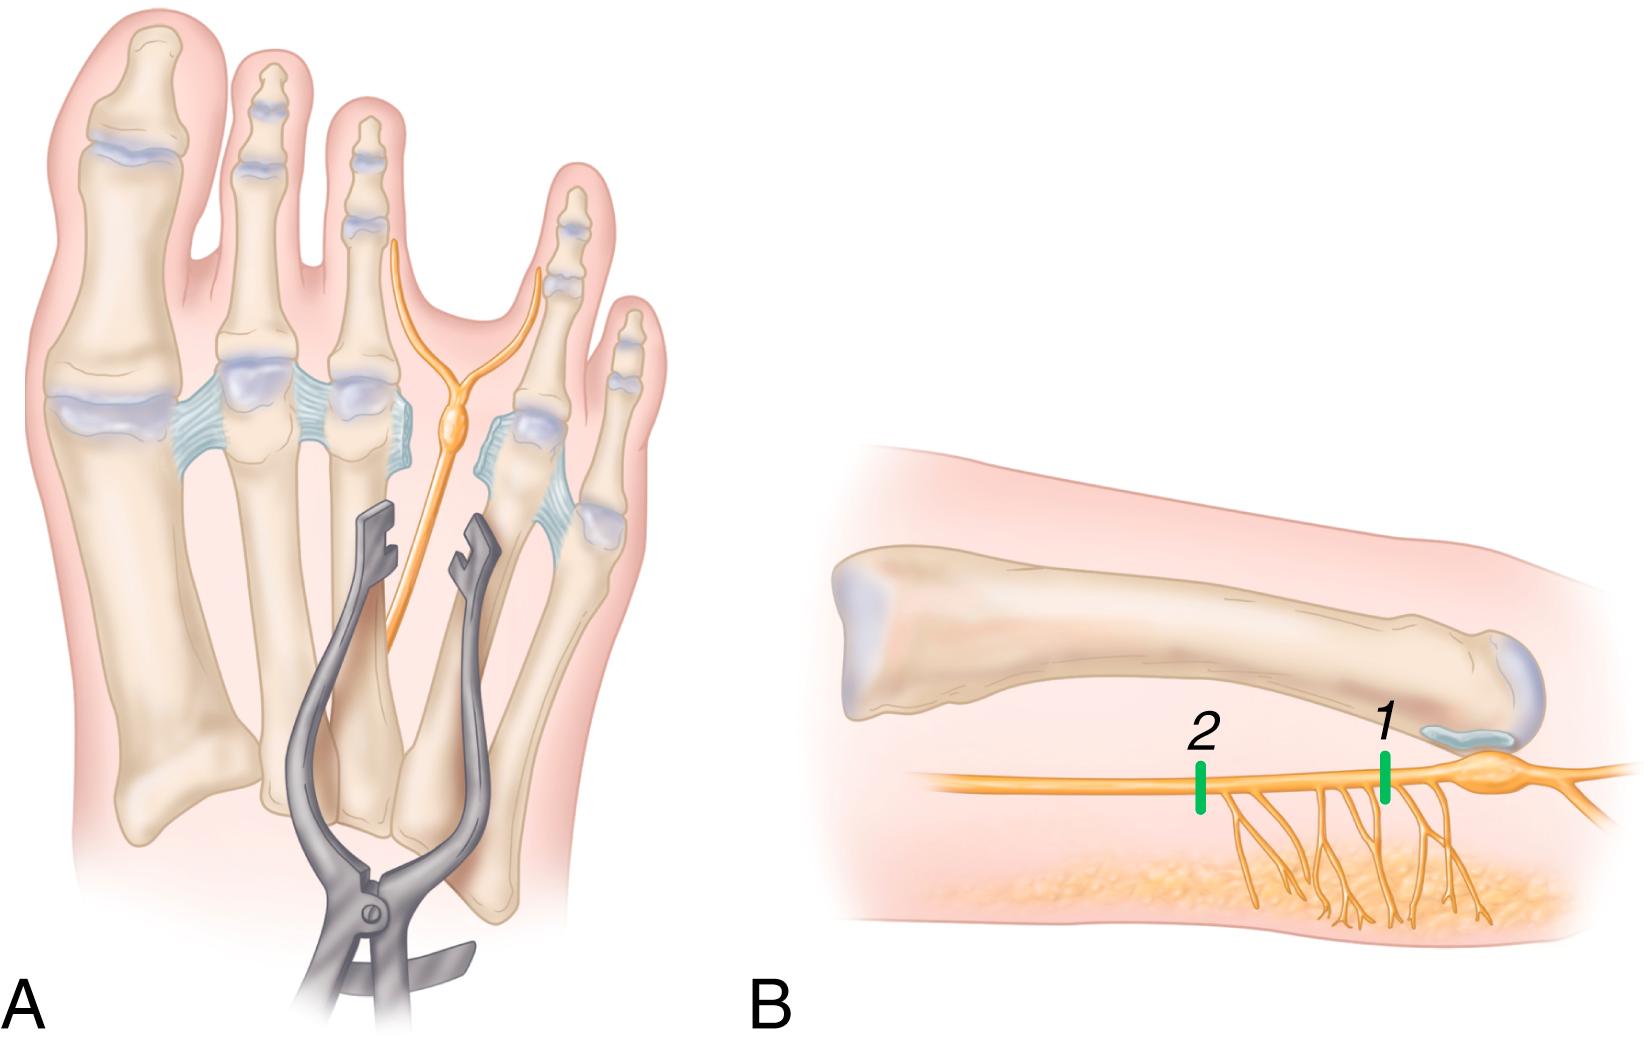 FIGURE 87.9, A, Lamina spreader used to expose neuroma. B, Lateral view of plantar branches of digital nerve. 1, Previously recommended level of neurectomy; 2, currently recommended level of neurectomy (3 cm proximal to ligament) to avoid plantarly directed nerve branches. SEE TECHNIQUE 87.4 .